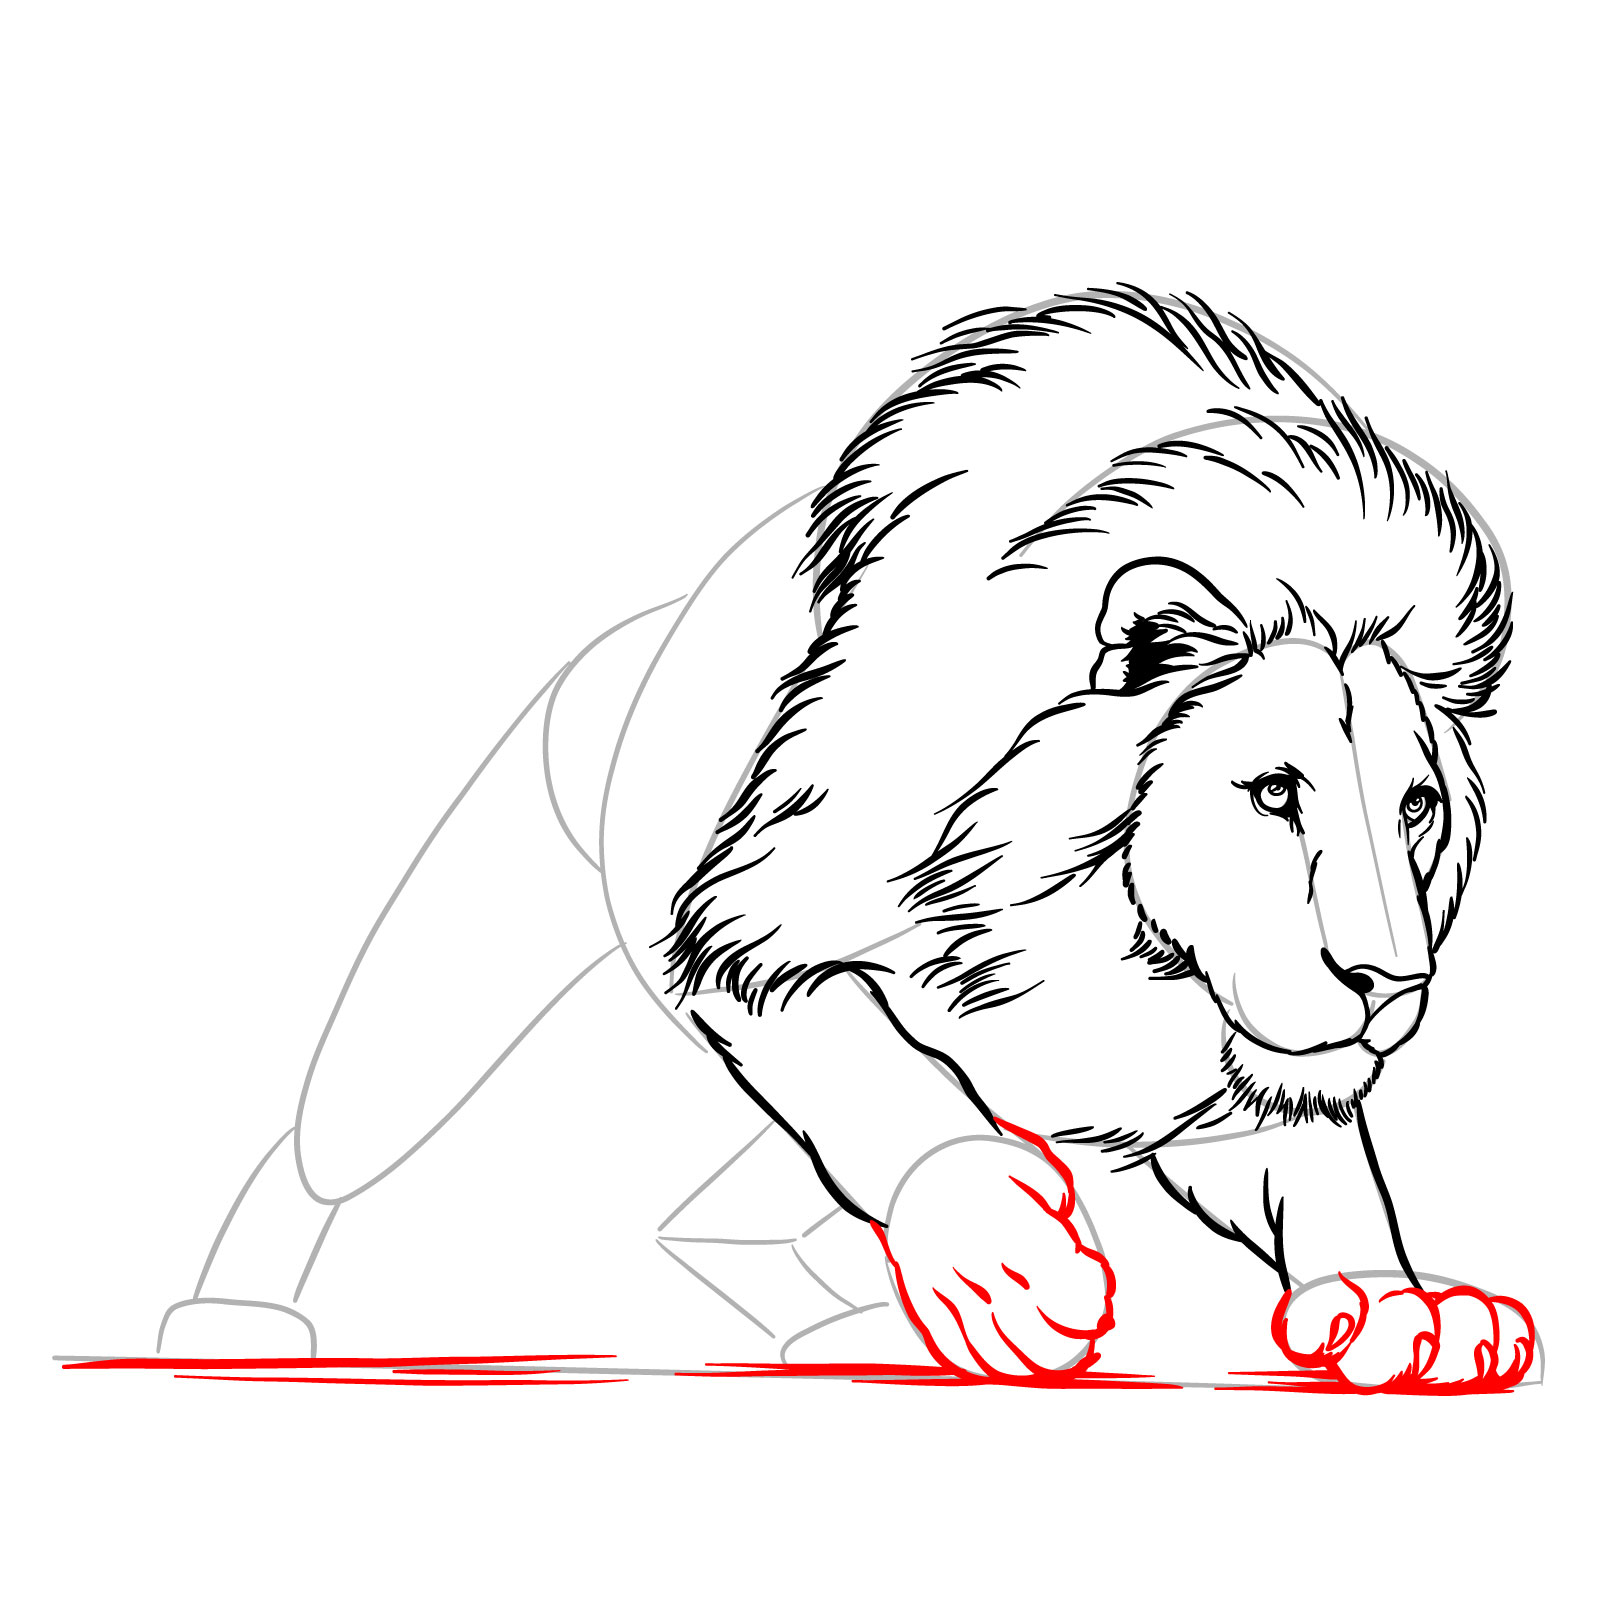 How to draw a hunting lion - Step 13: Adding pads and toes